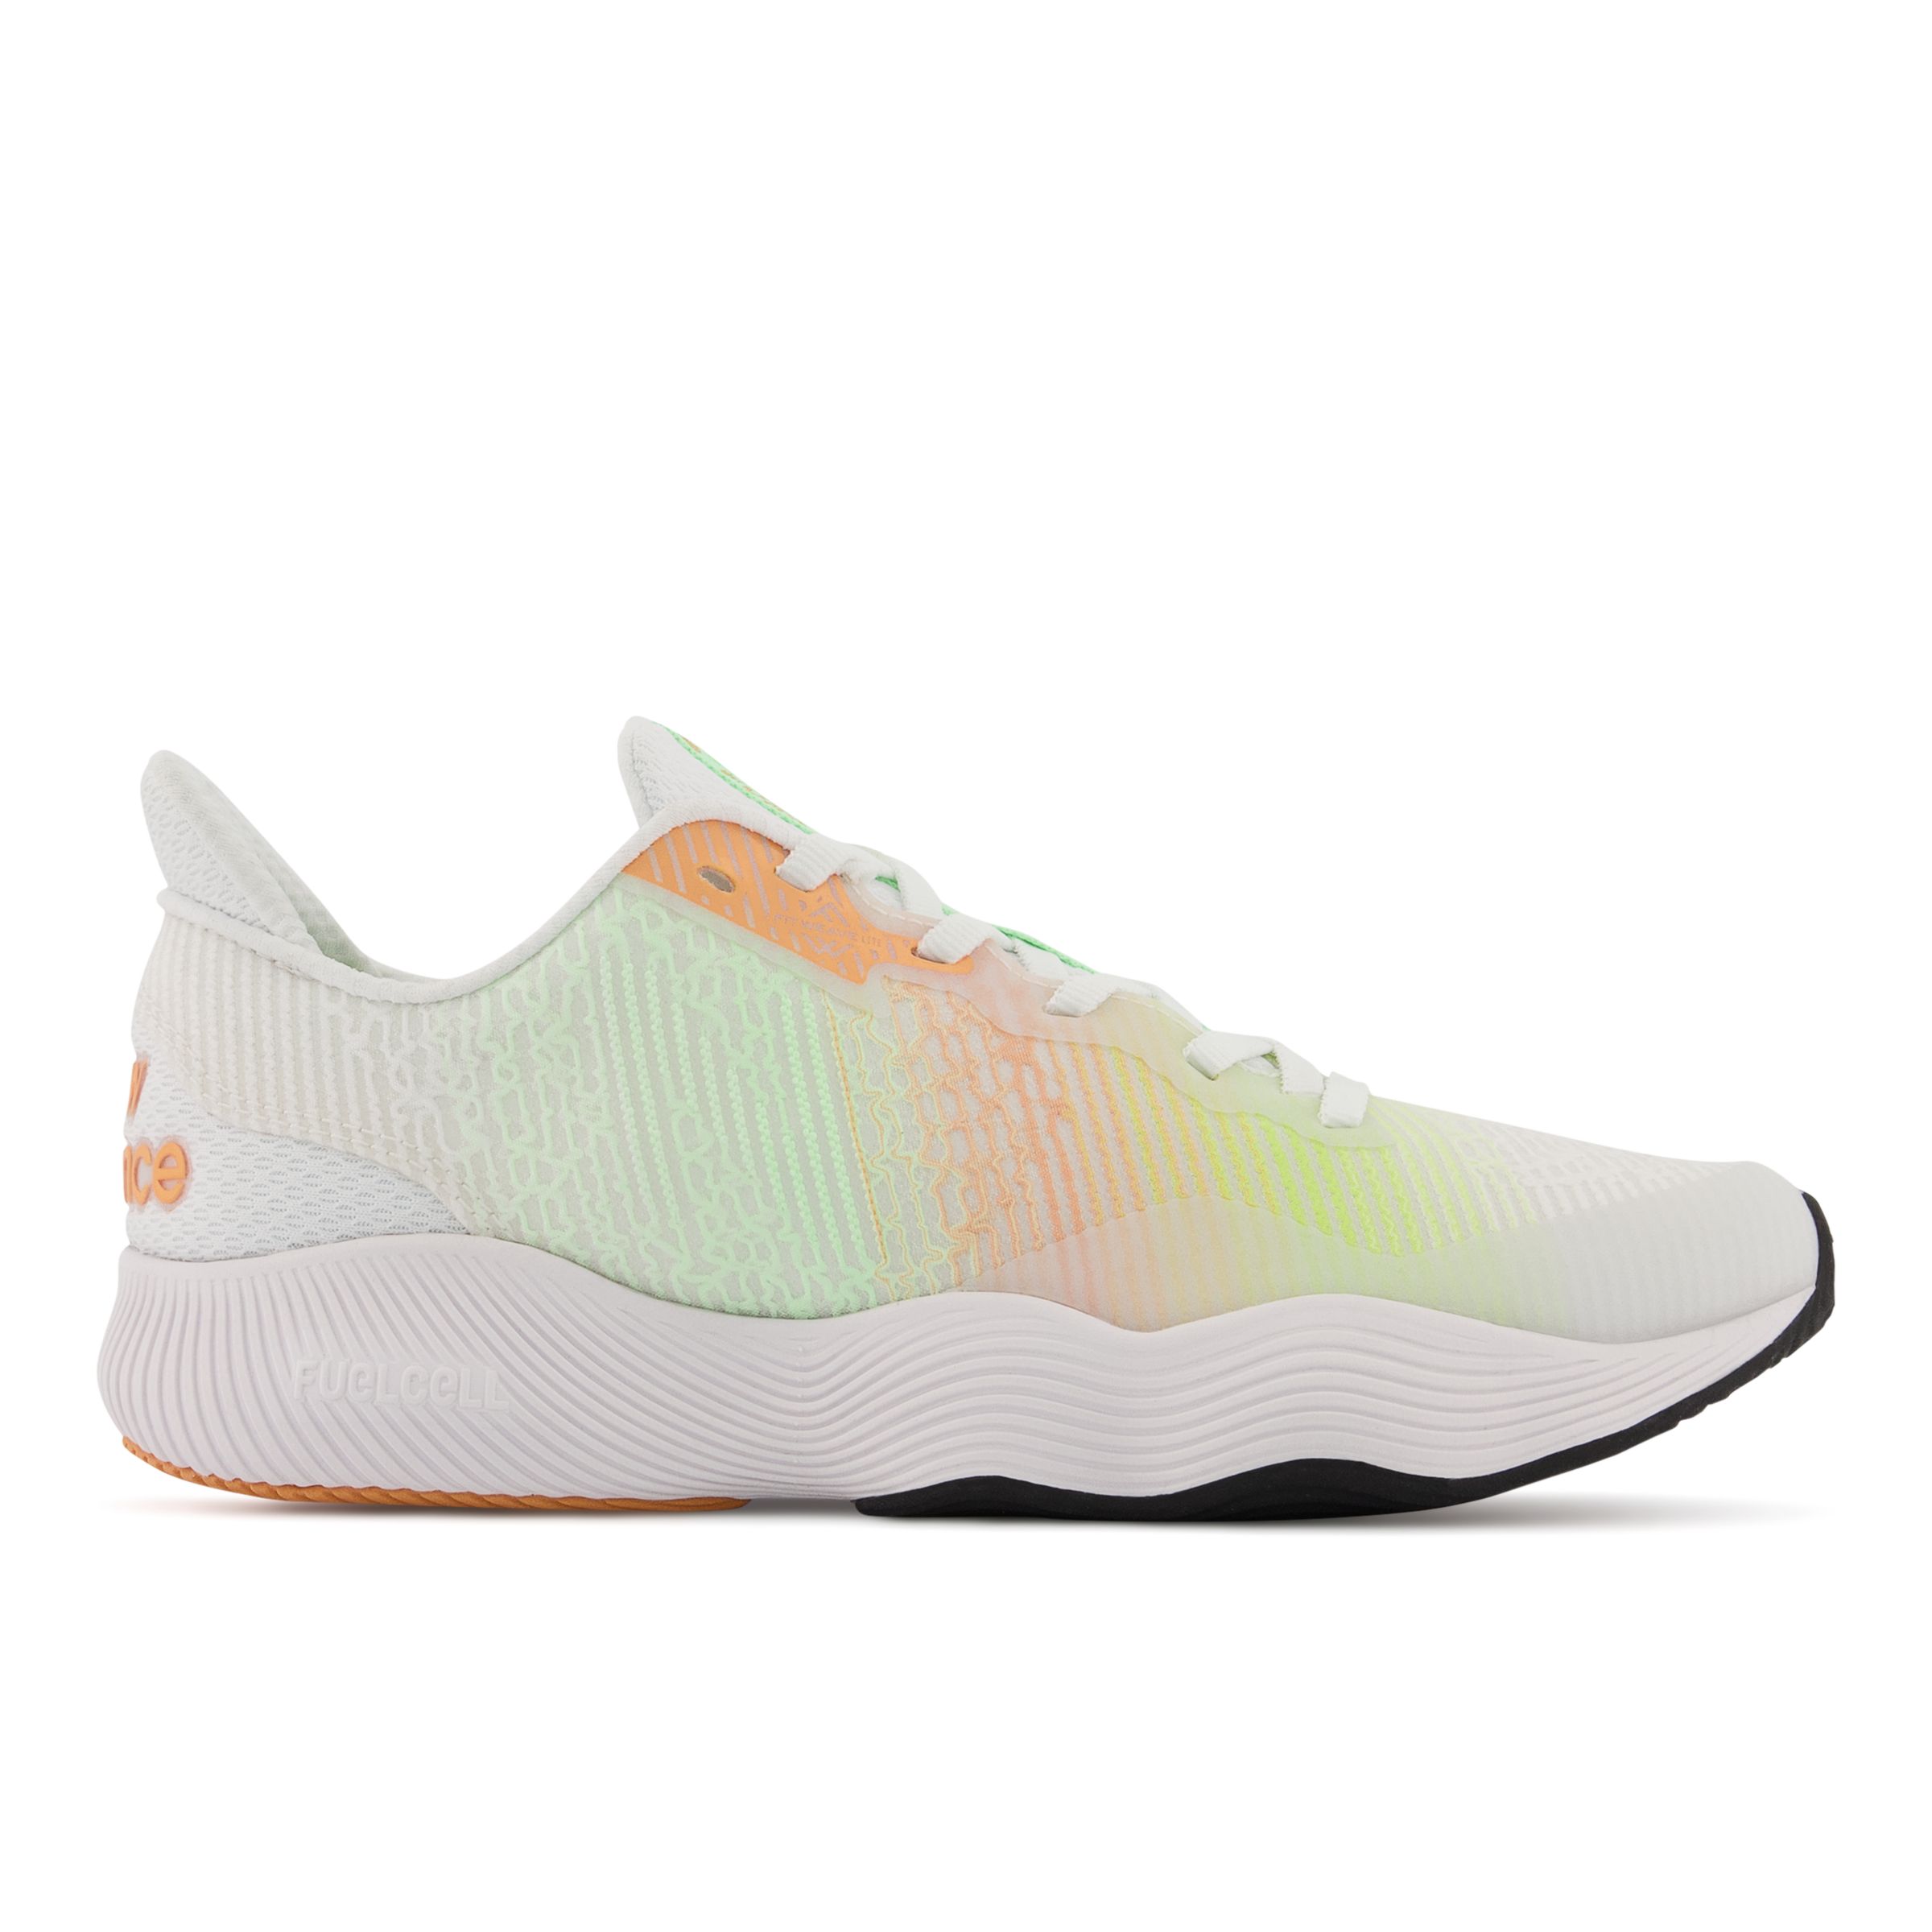 

New Balance Women's FuelCell Shift TR White/Yellow/Orange/Green - White/Yellow/Orange/Green